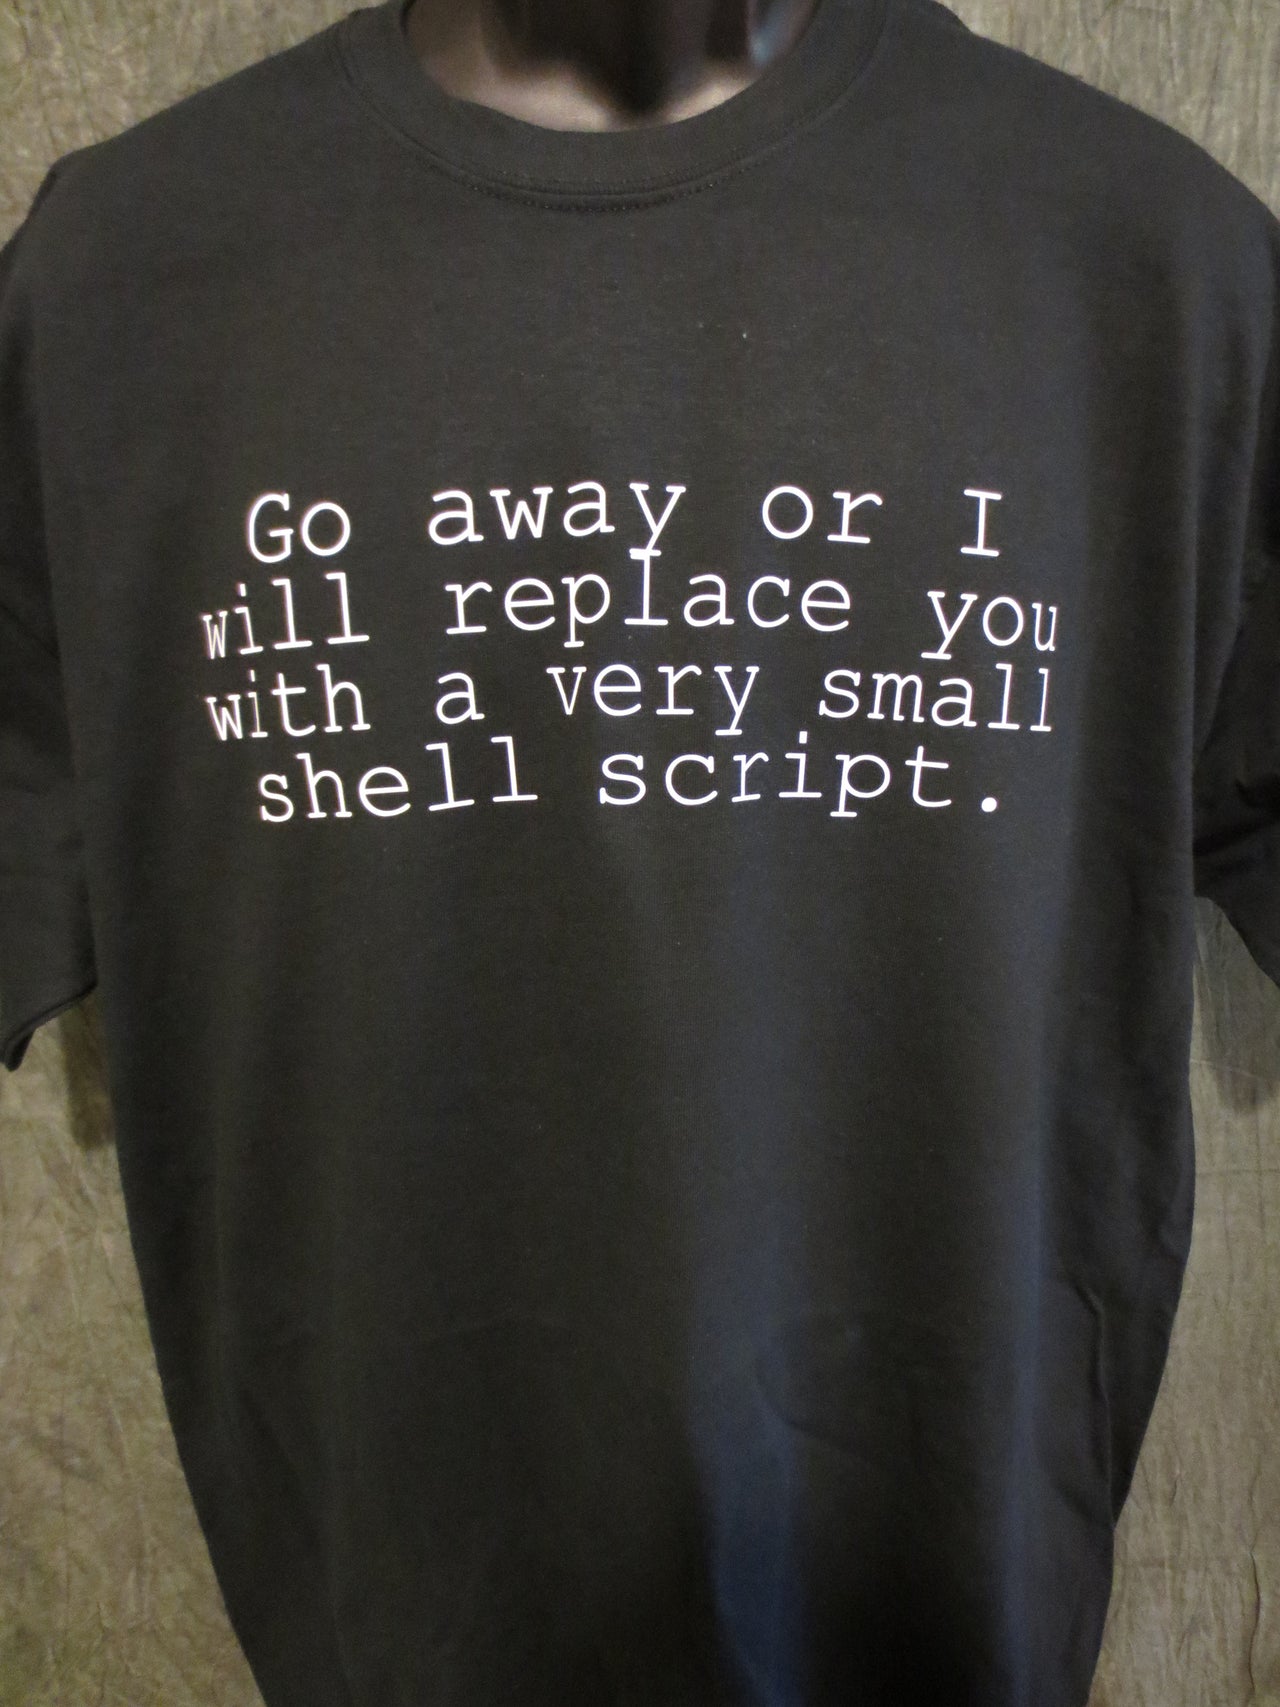 Go Away or I will Replace you With a Very Small Shell Script Tshirt: Black With White Print - TshirtNow.net - 5